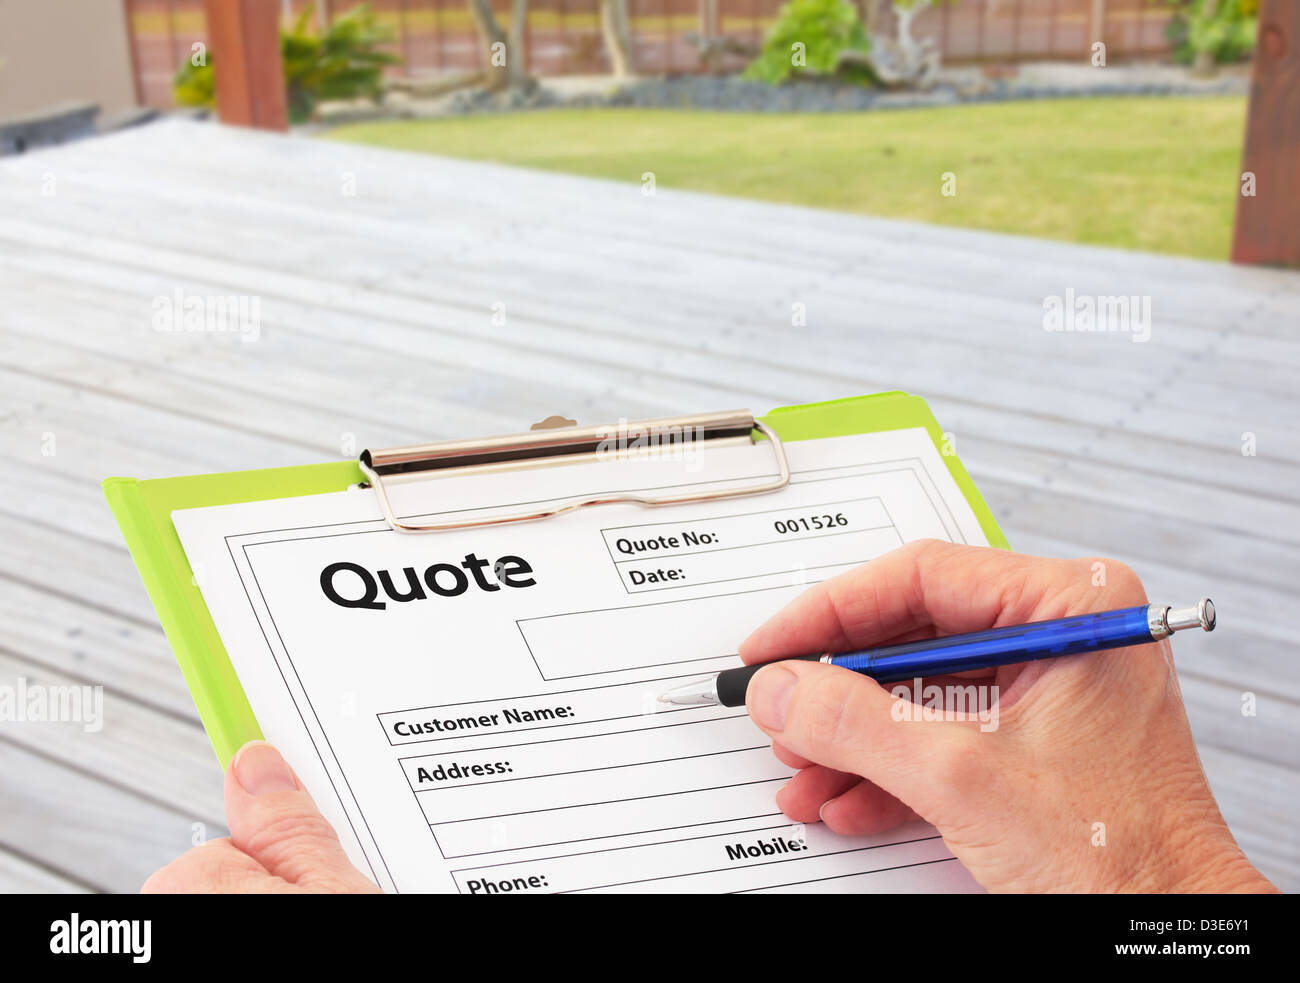 Hand Writing a Quote for Deck Renovation Stock Photo